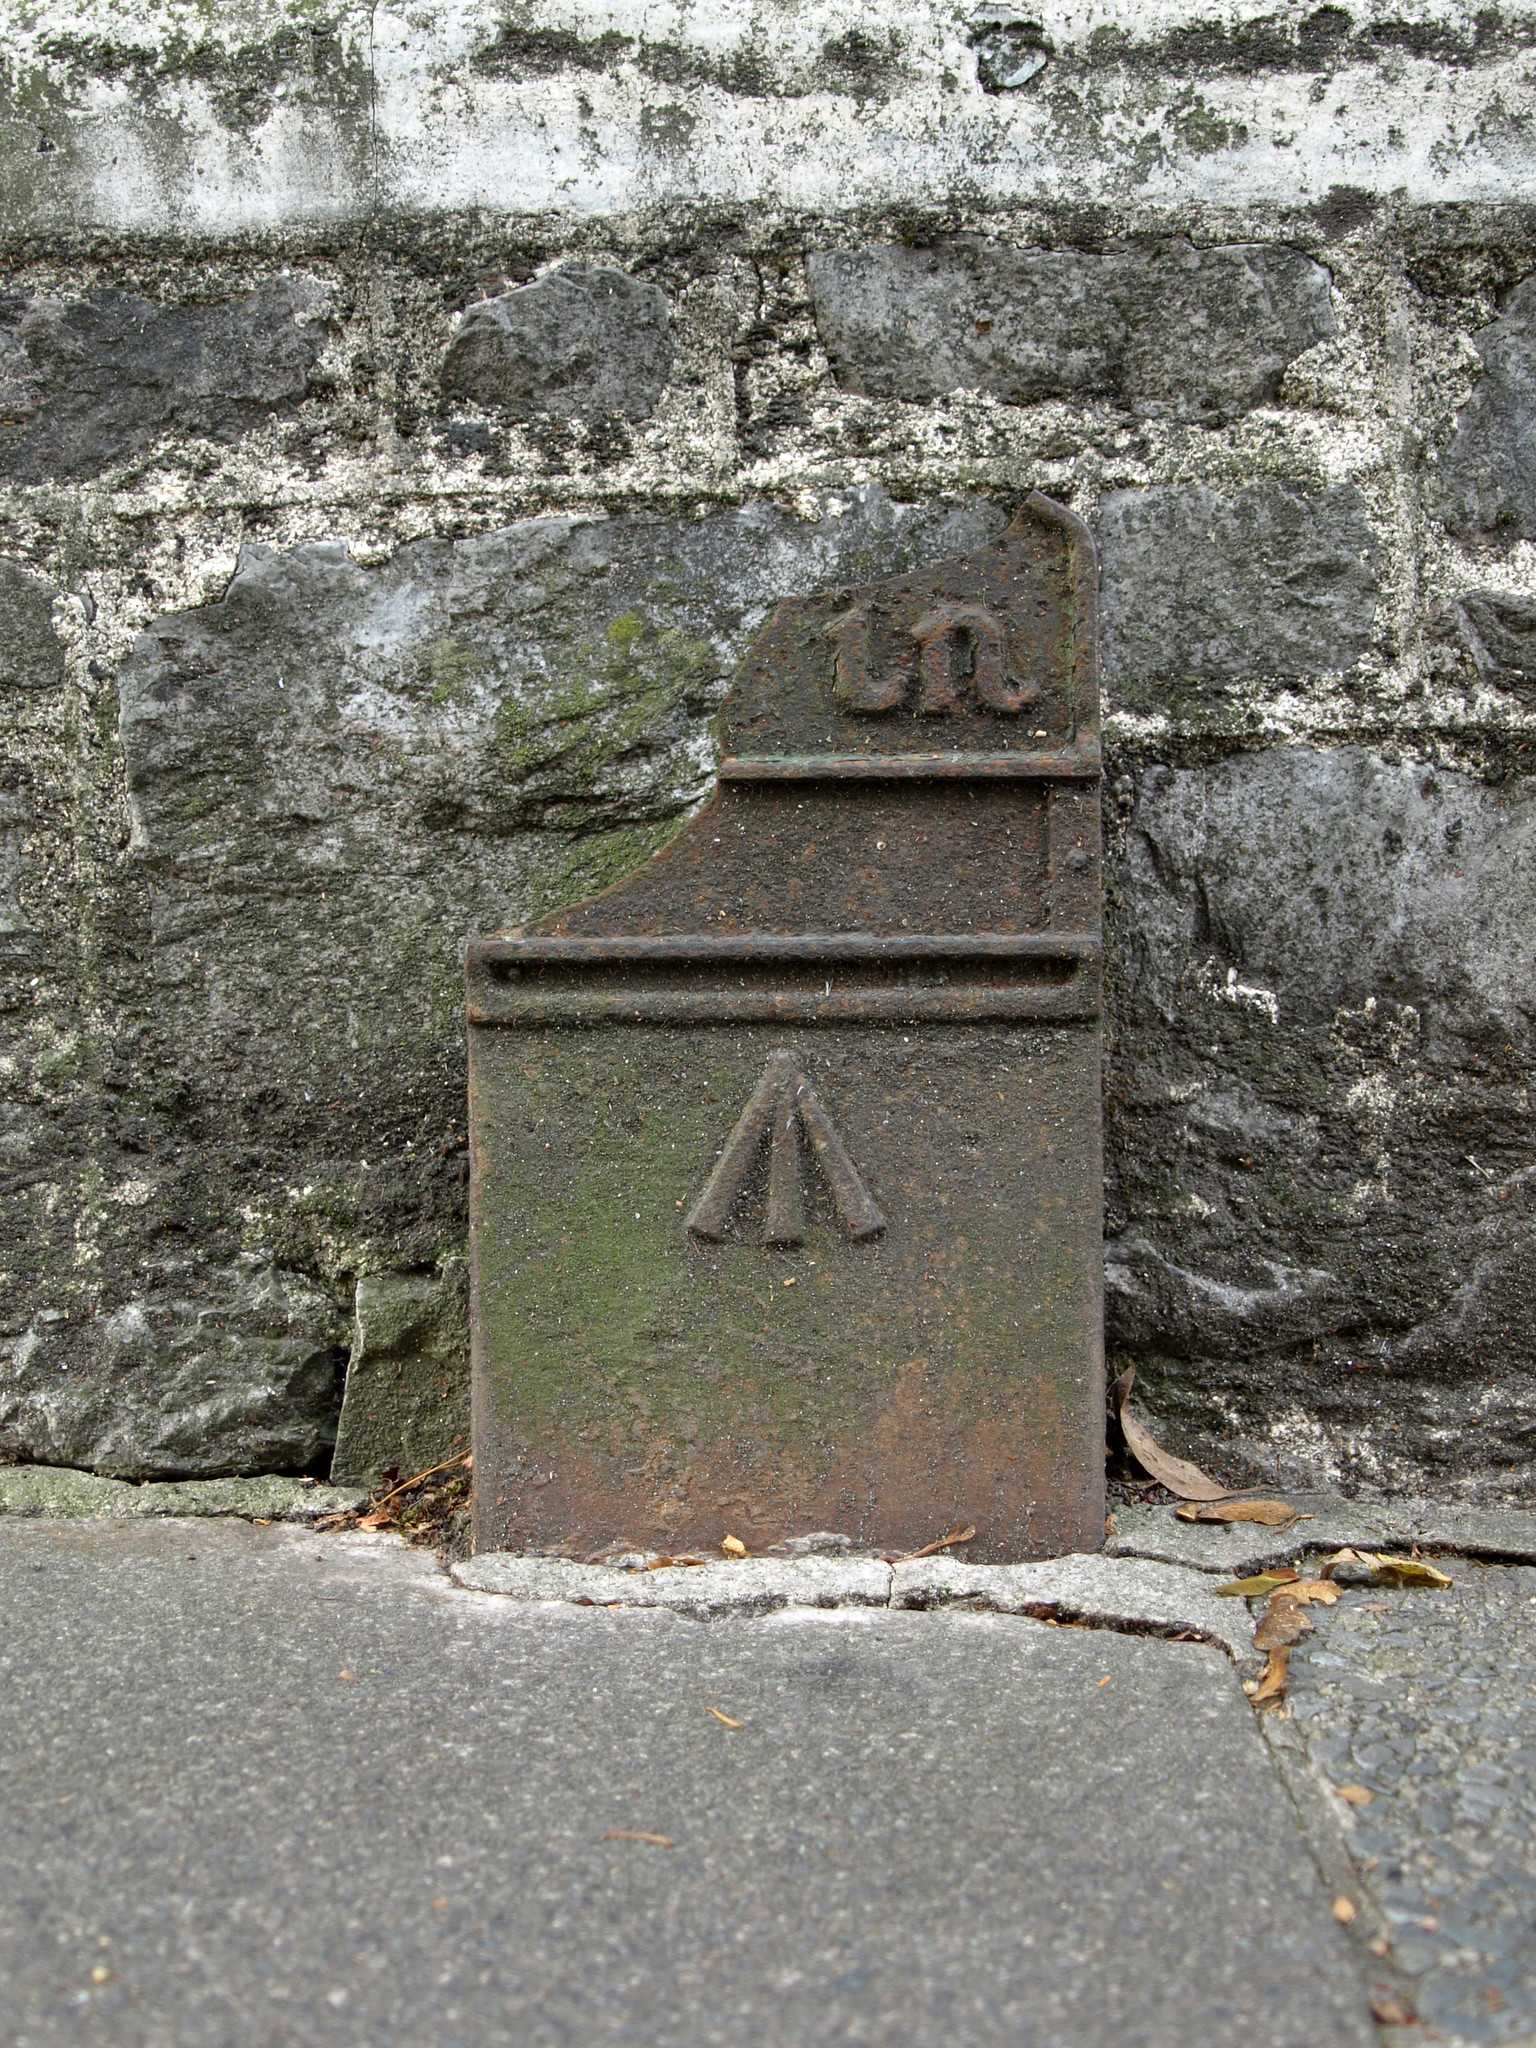 Telegraph cable marker post at Mannamead Road, nr. Torr Lane, Plymouth by Chris Williamson 